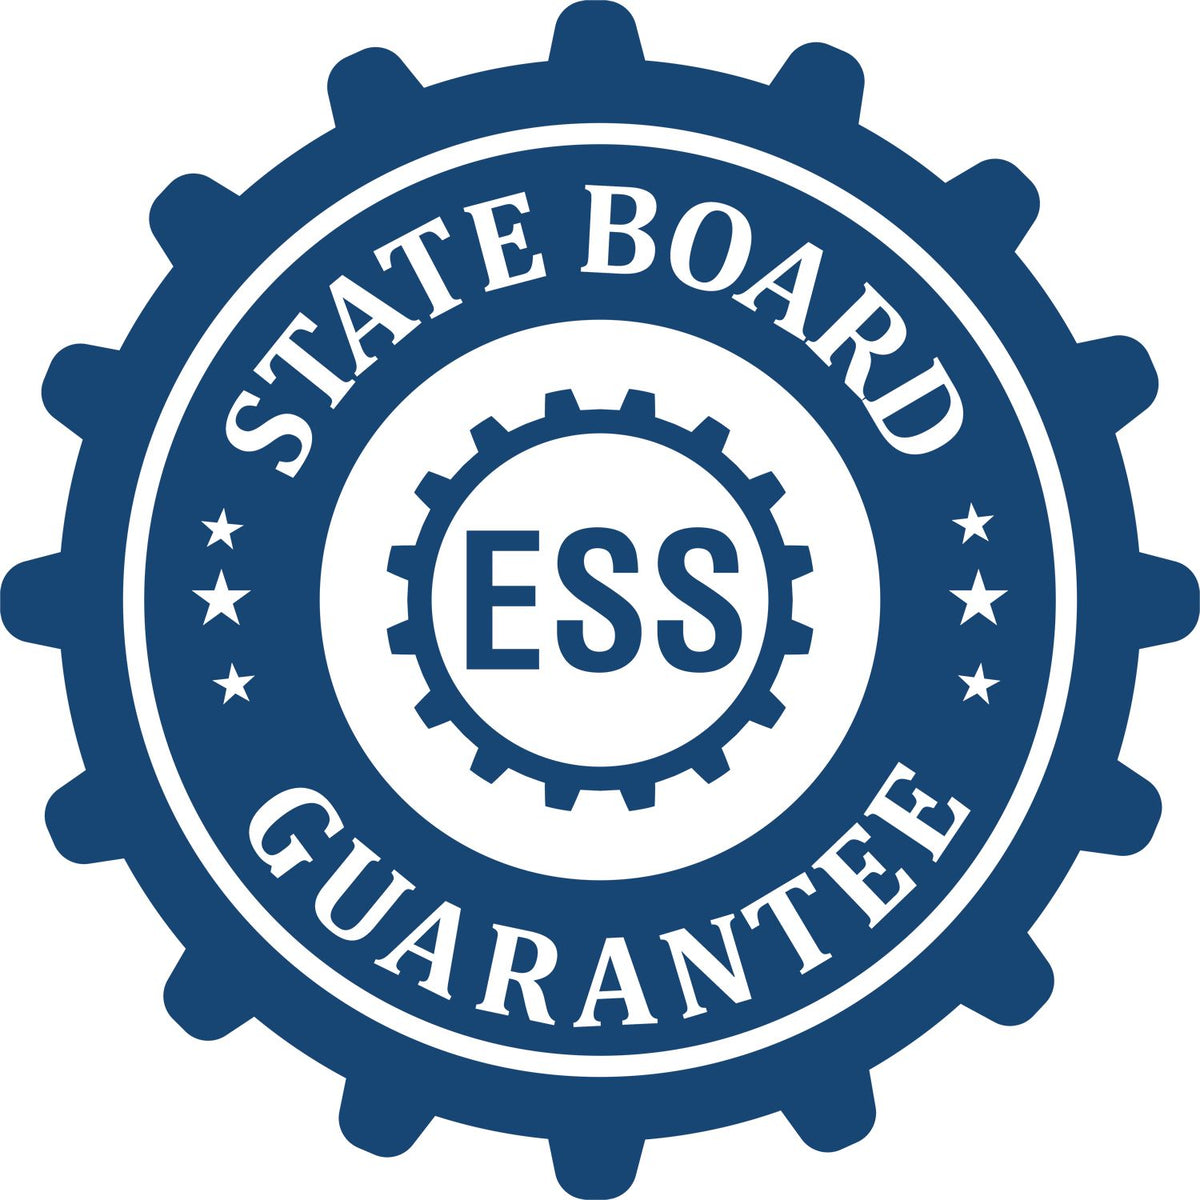 An emblem in a gear shape illustrating a state board guarantee for the Handheld Michigan Professional Geologist Embosser